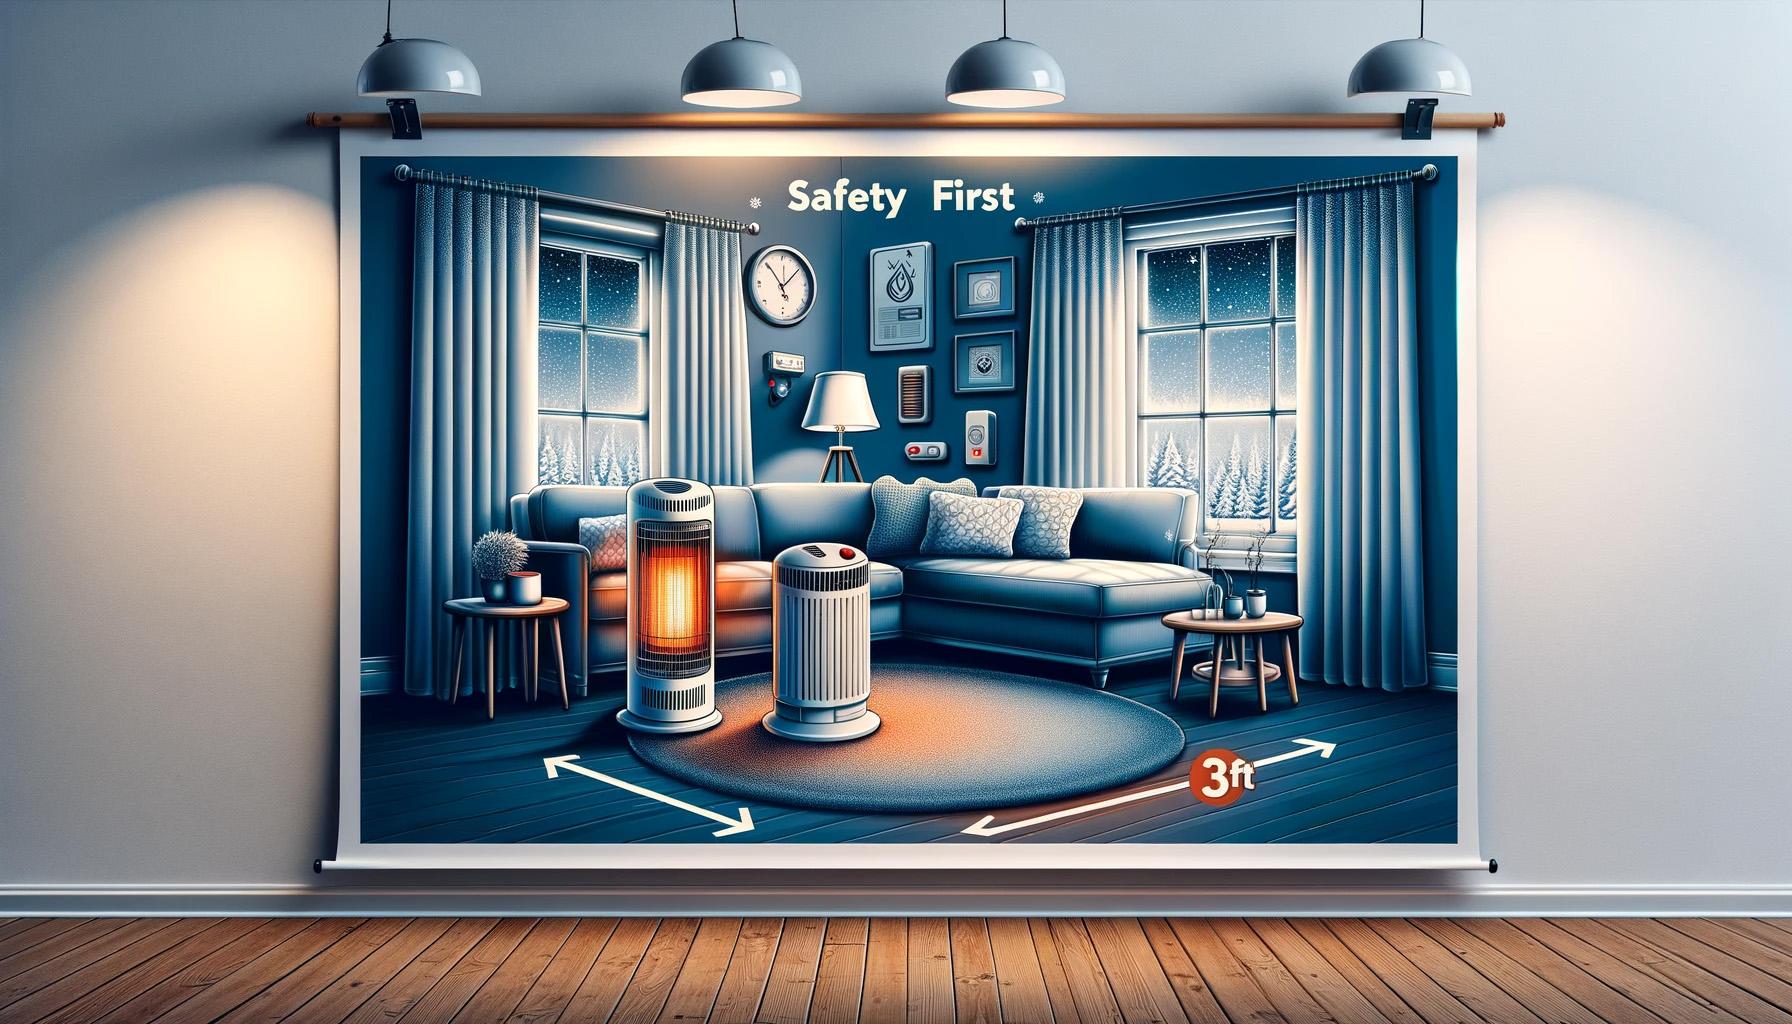 Space Heater Safety News Graphic